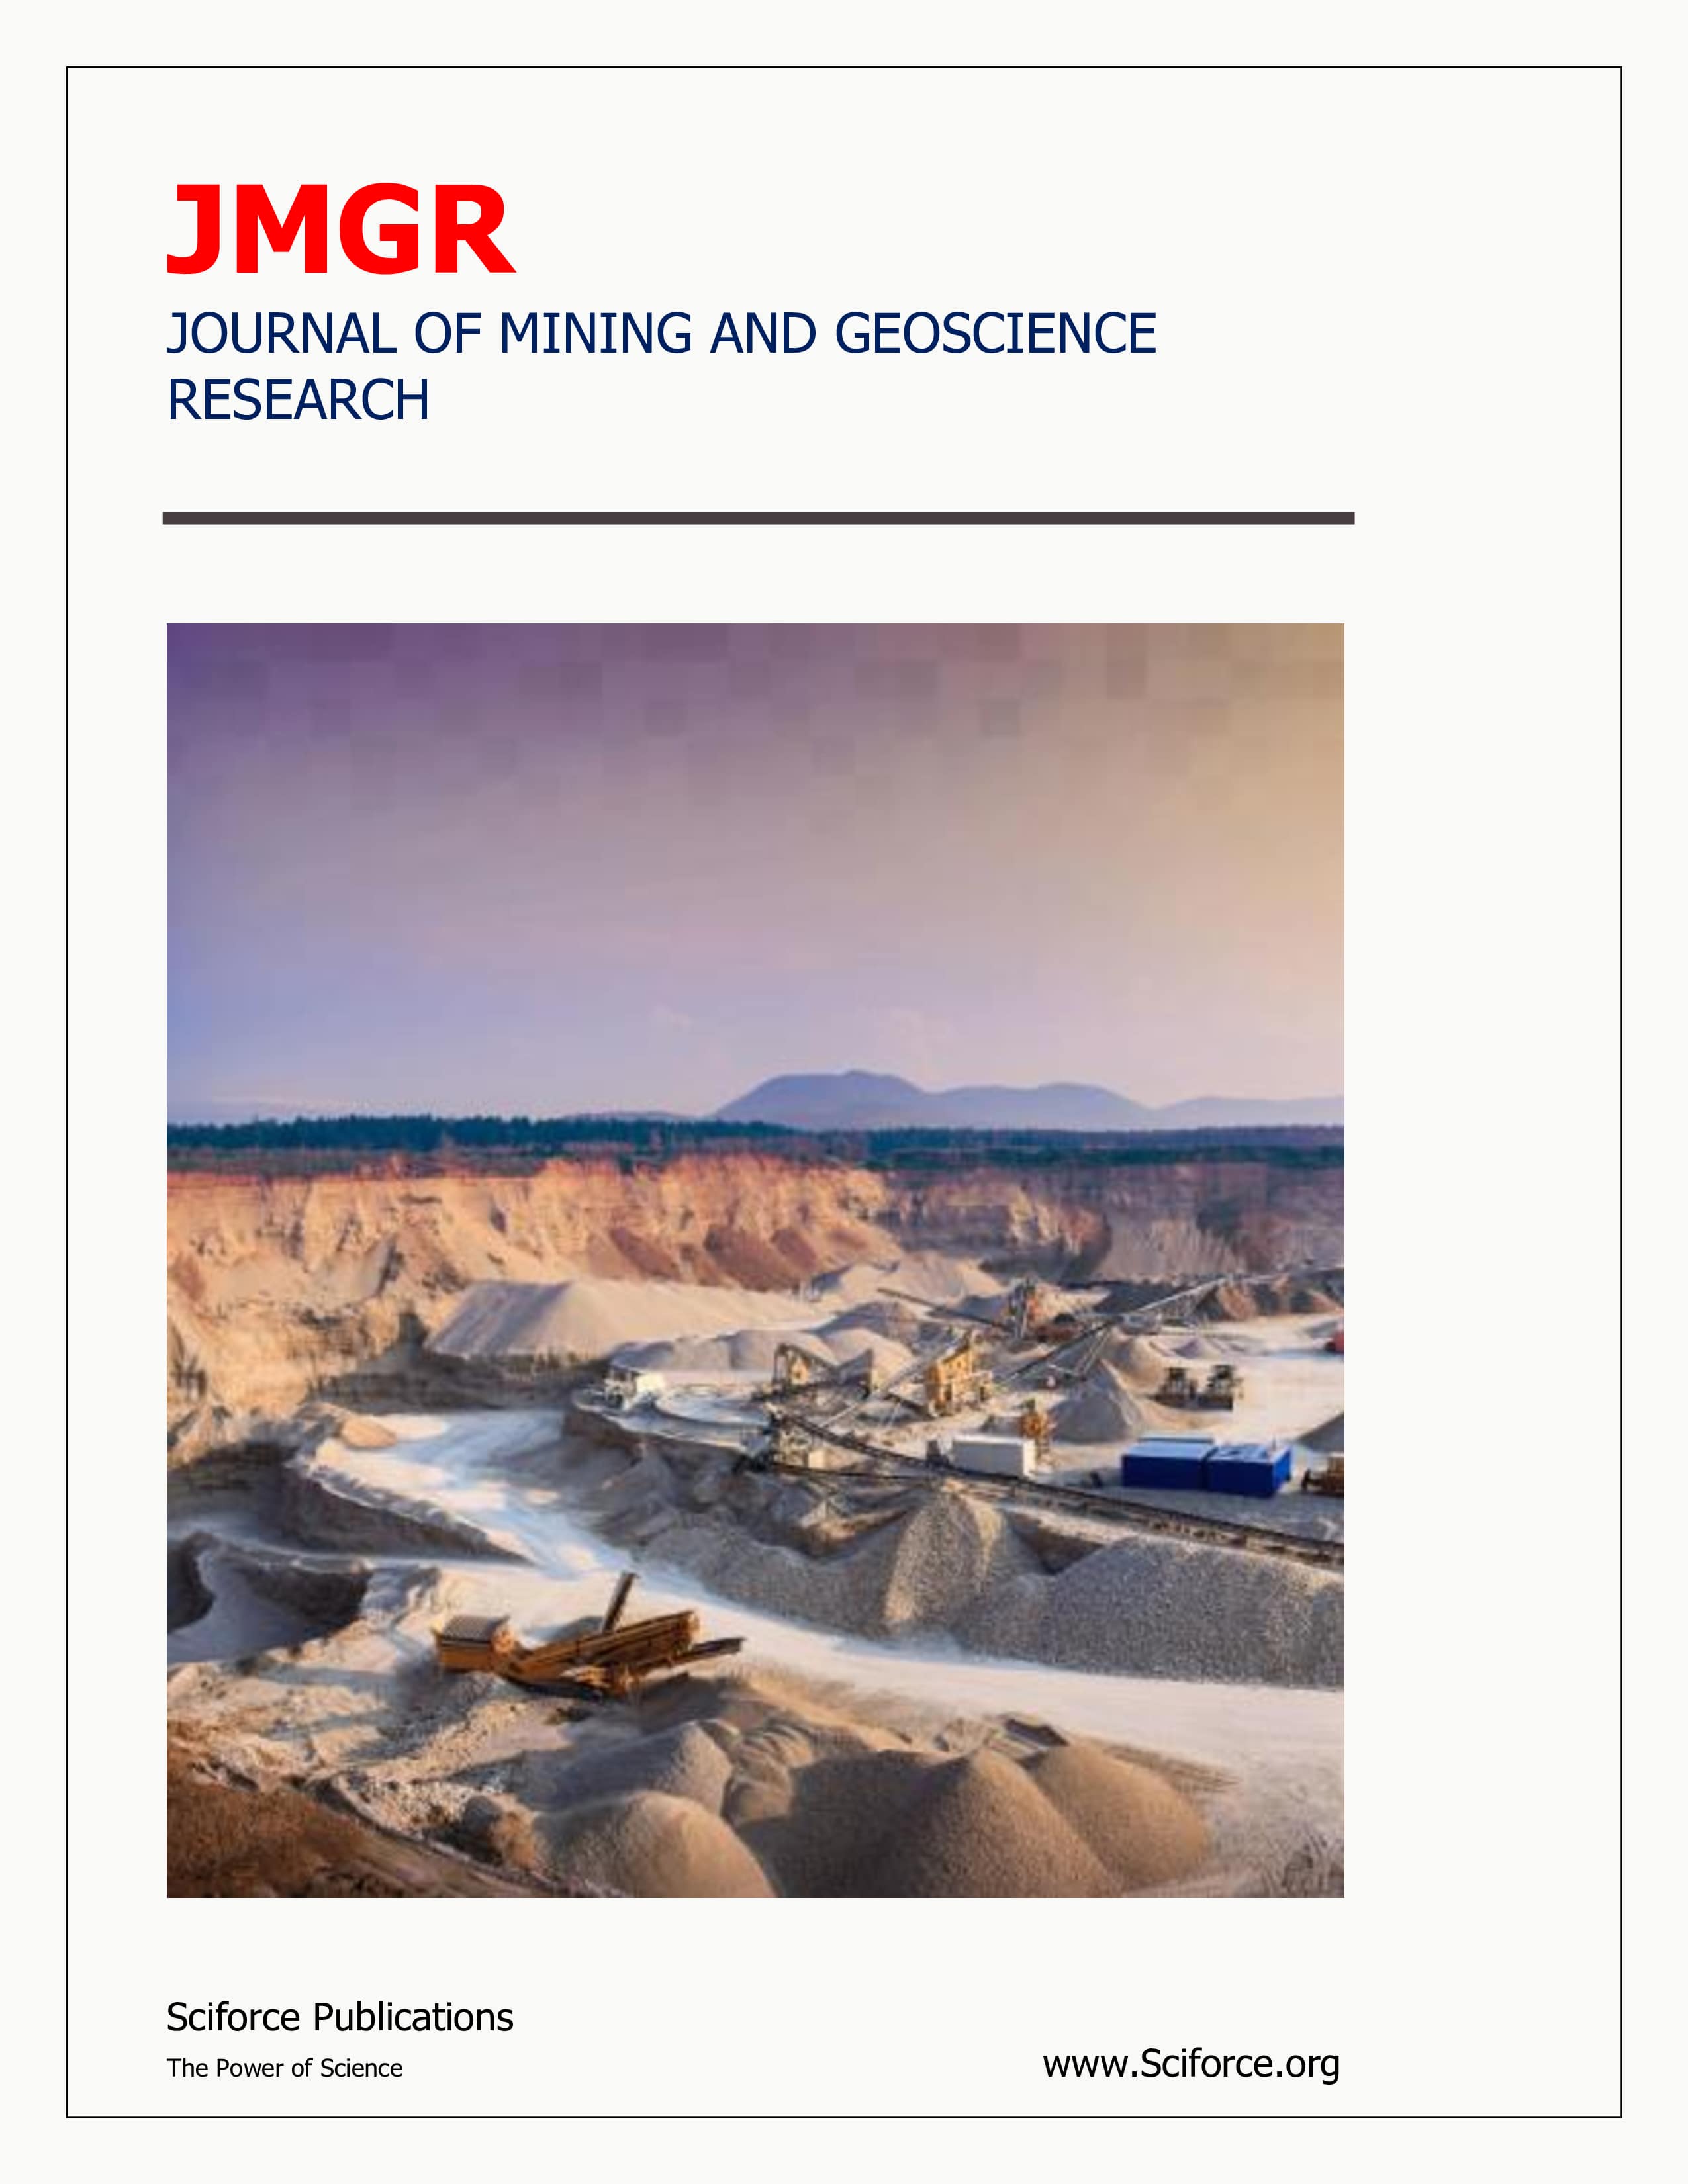 Journal of Mining and Geosciences Research